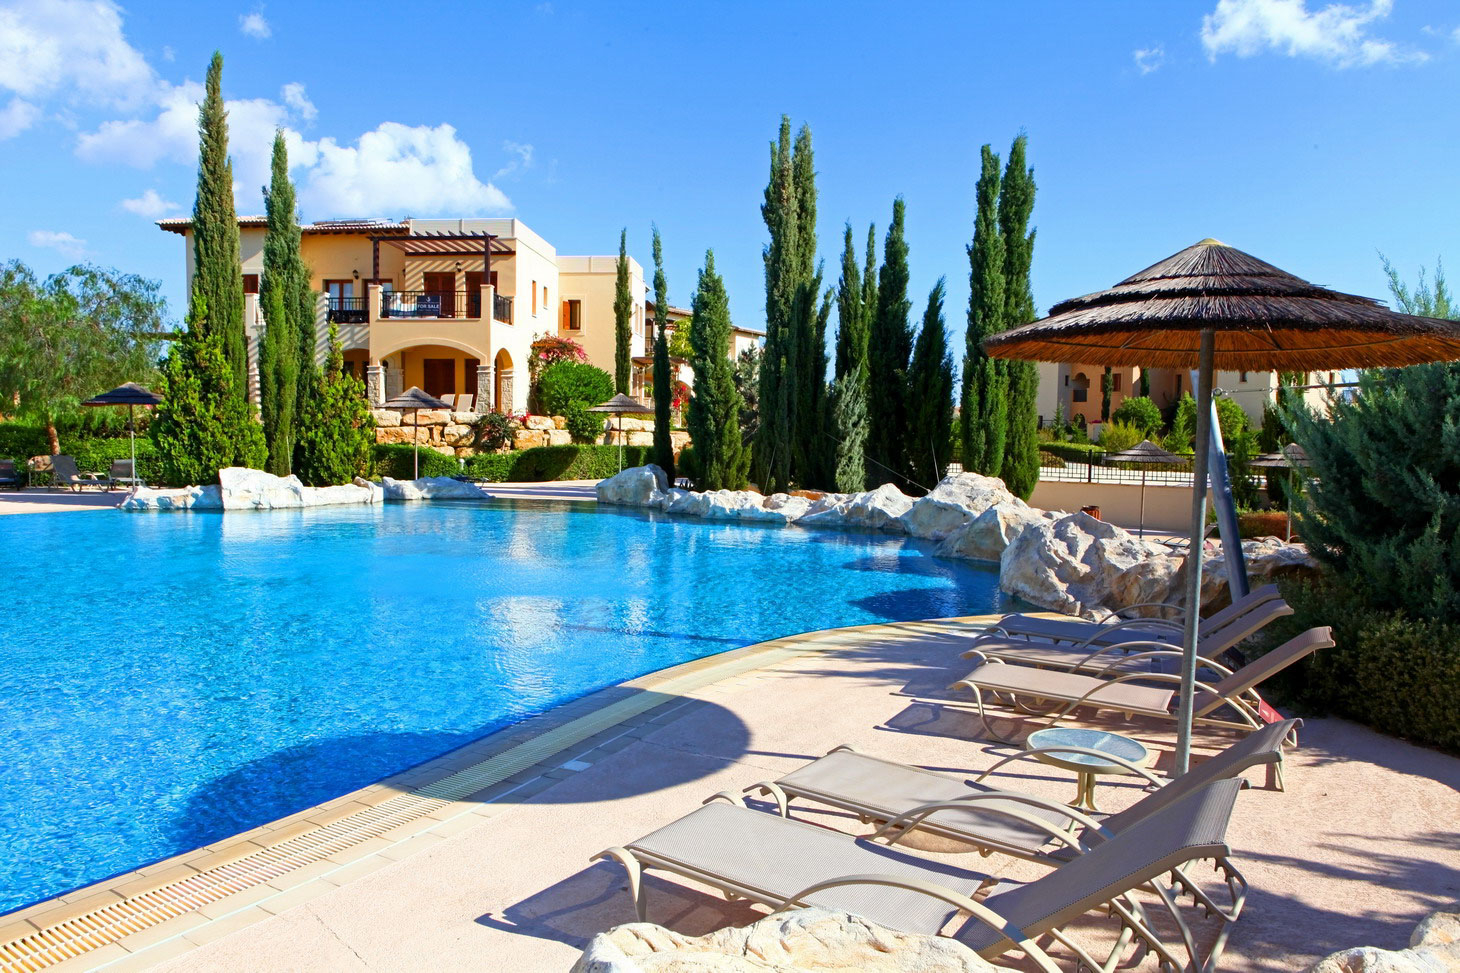 The shared pool for the apartments at Aphrodite Hills Holiday Residences, Paphos, Cyprus